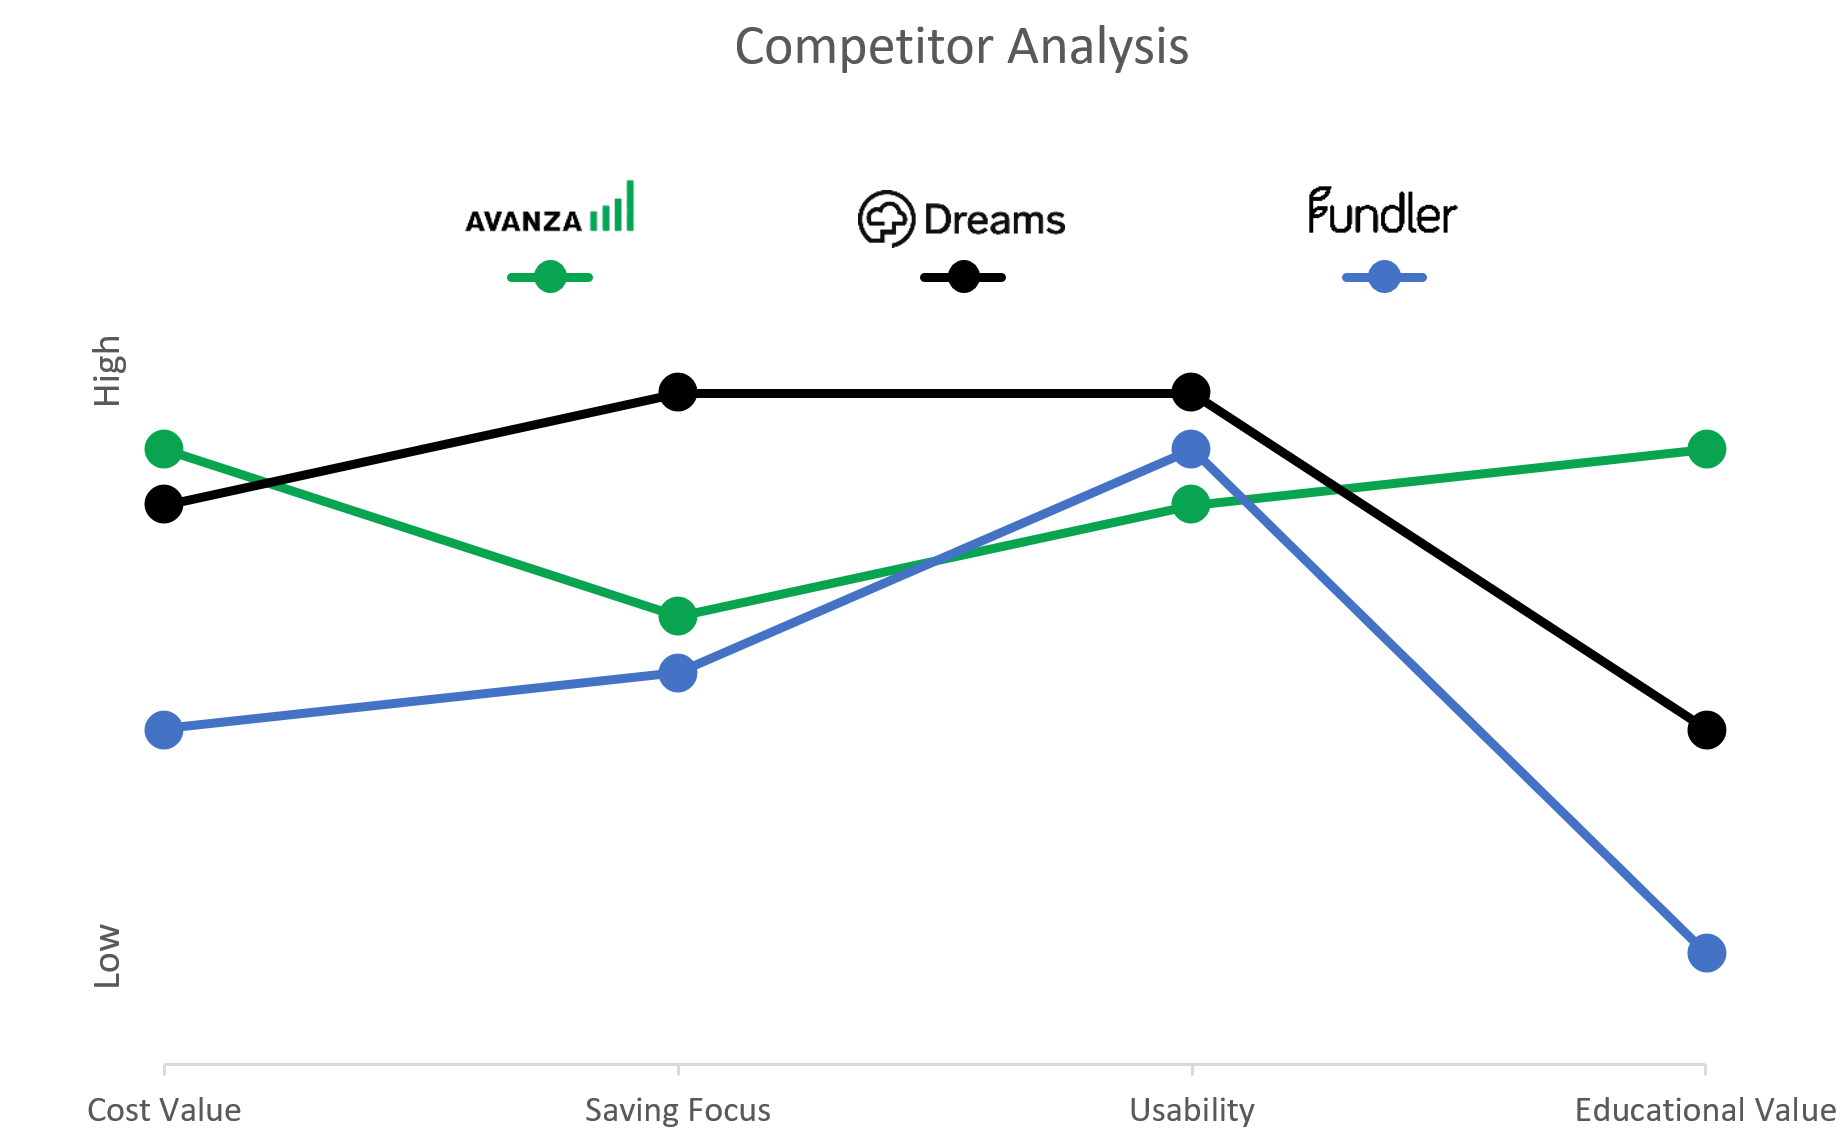 Competitor analysis chart, with Avanza, Dreams & Fundler. Avanza has the highest education value and cost value, and Dreams has the highest usability and saving focus.